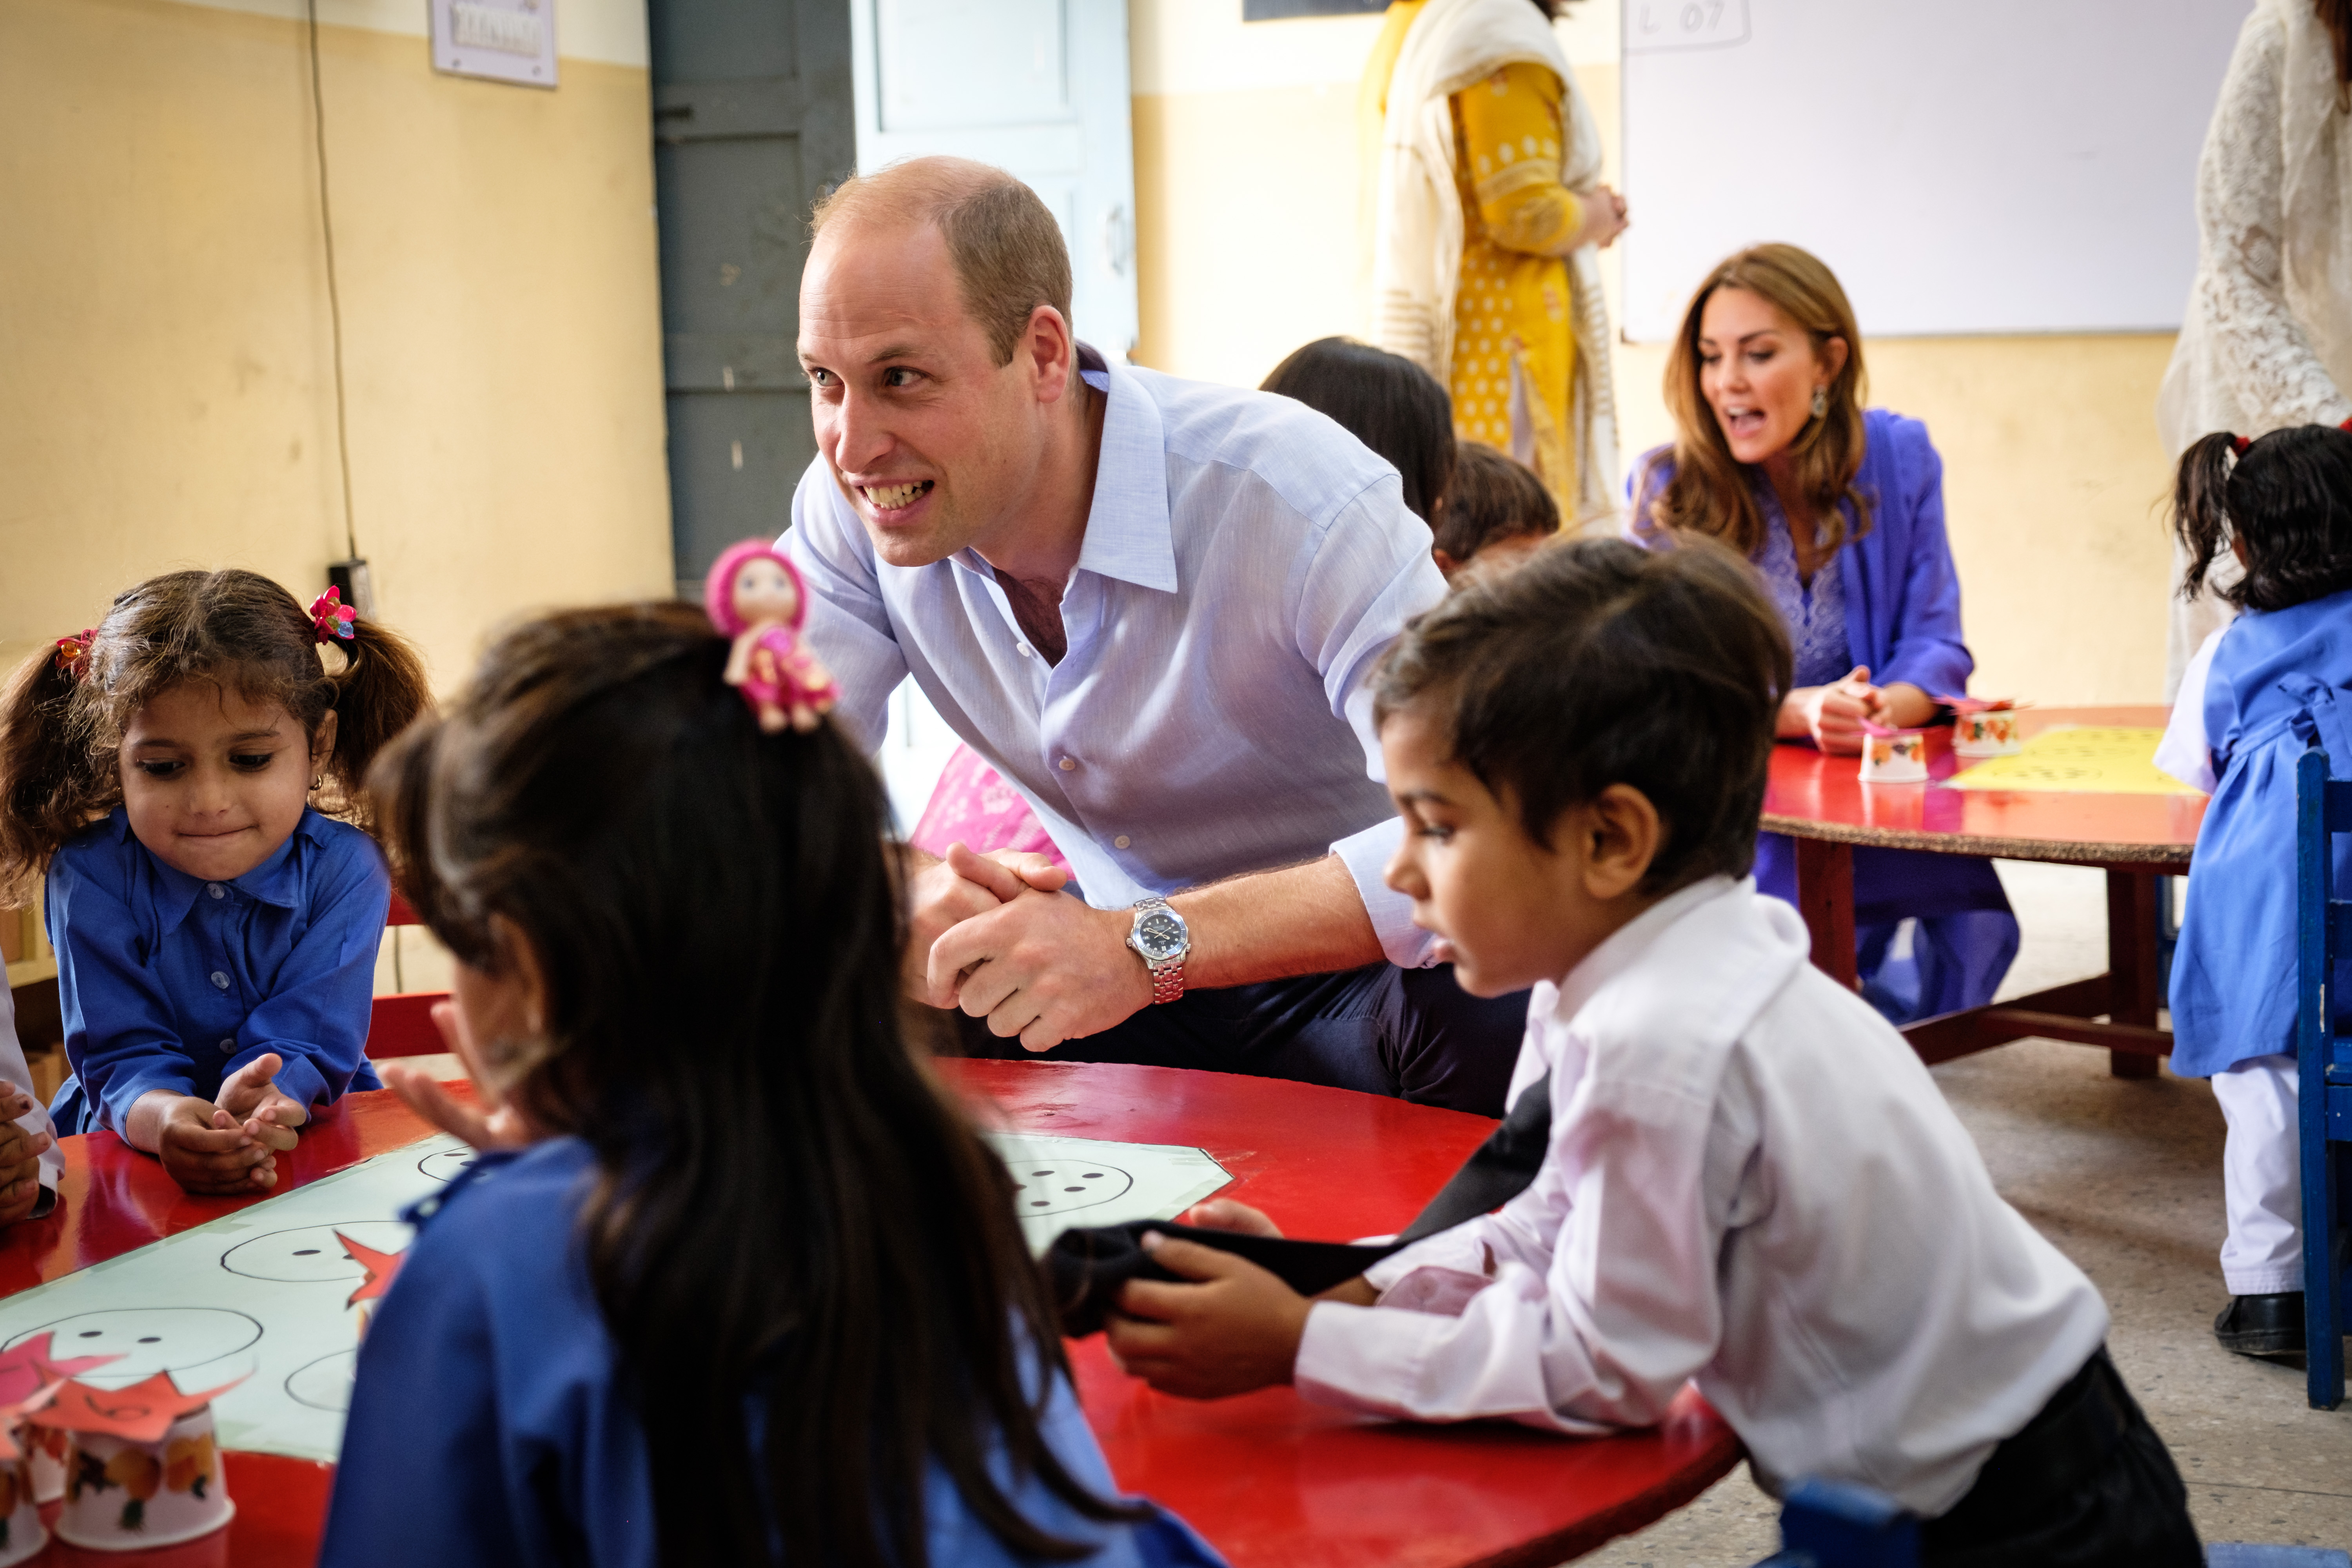 The Duke and Duchess of Cambridge visit a school in Pakistan 